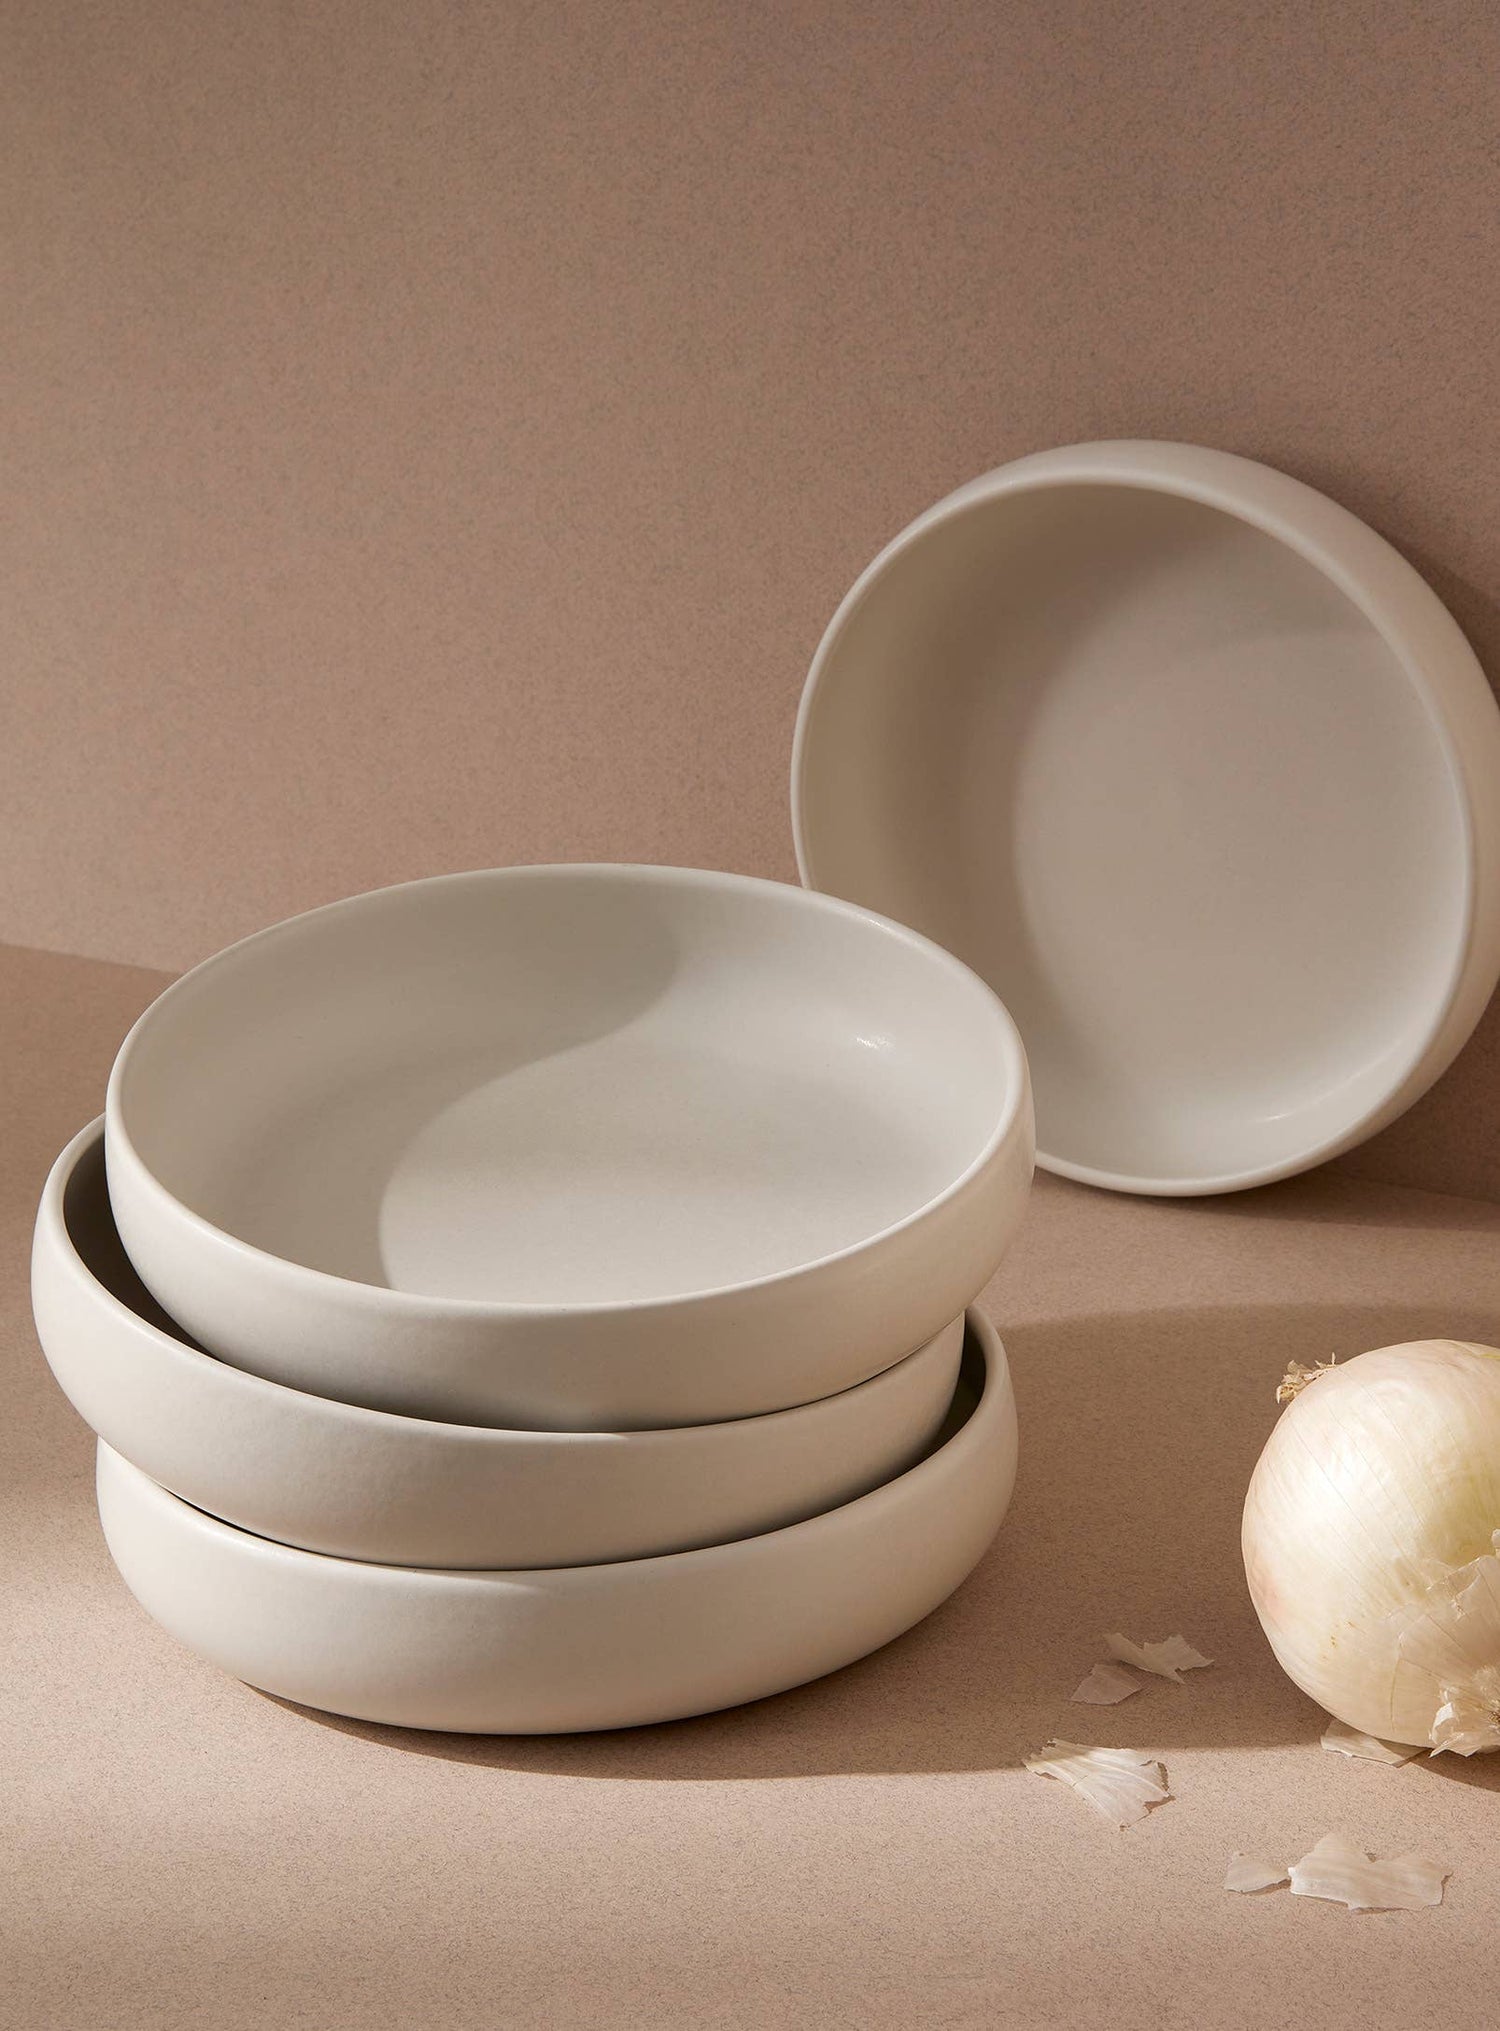 A stack of Minimalist stoneware pasta plate in a modern white finish